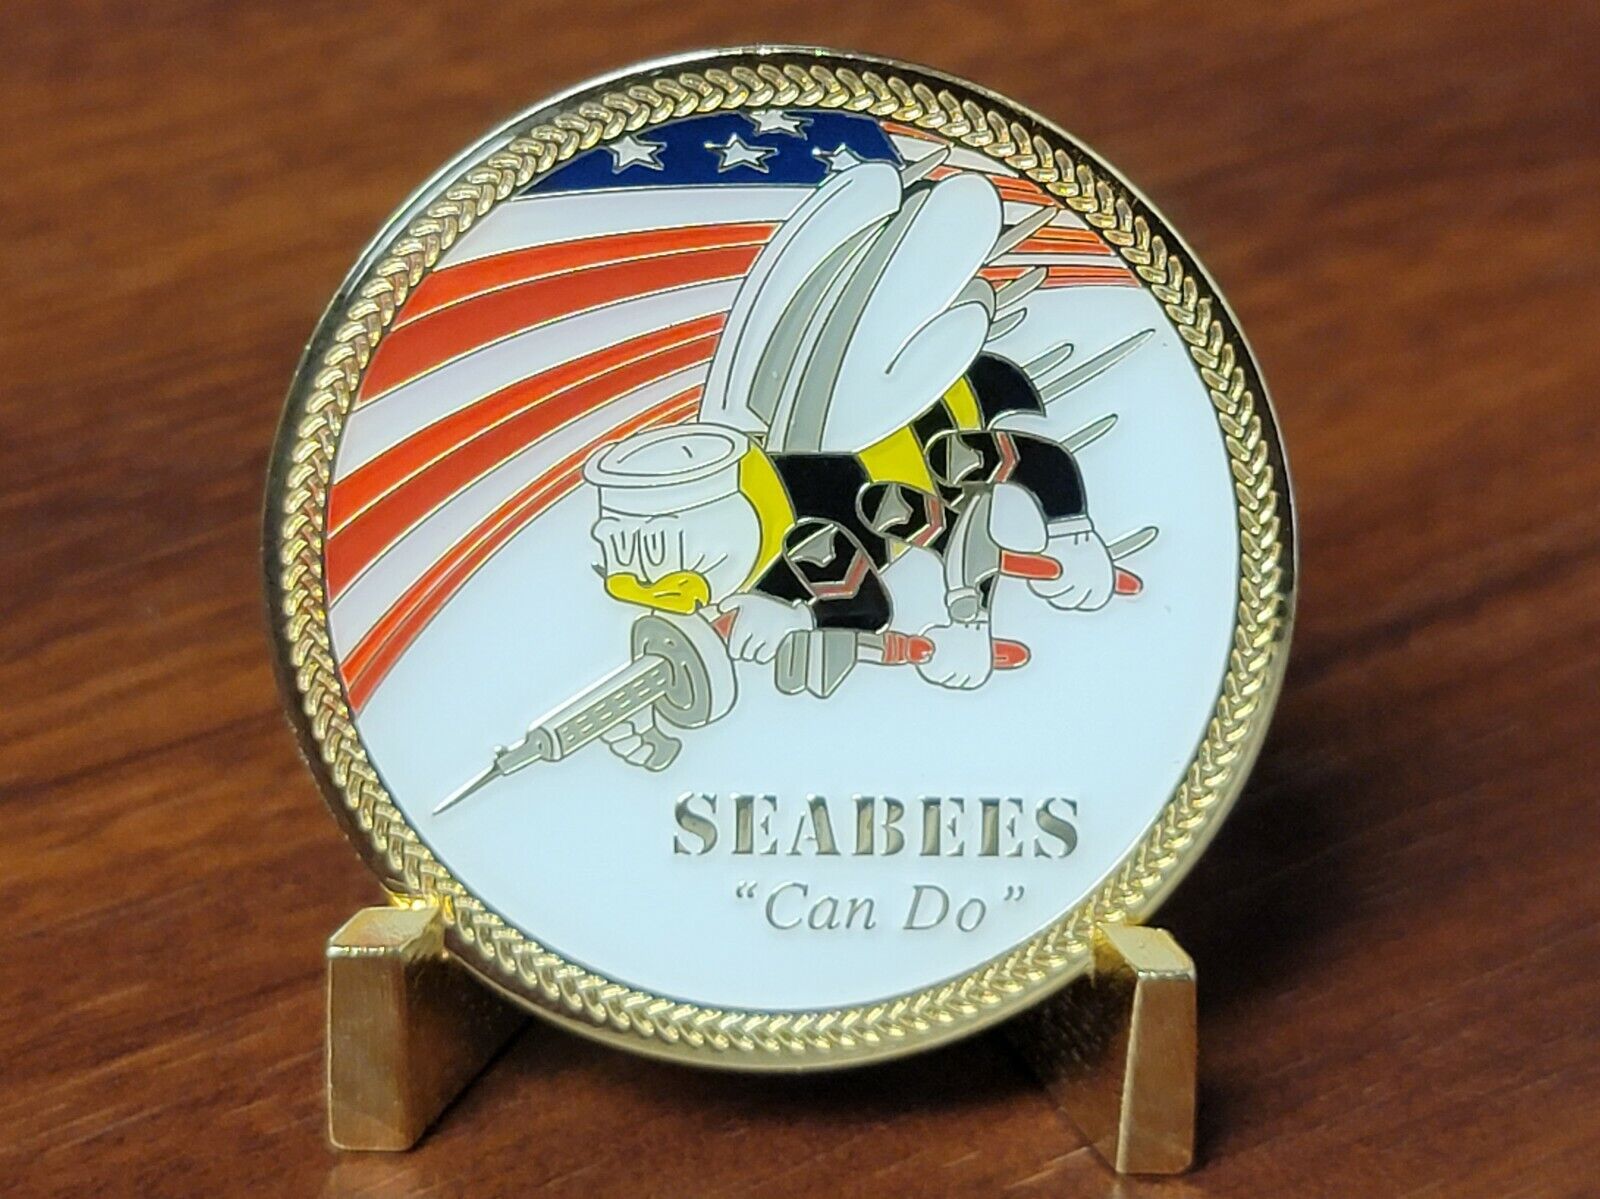 US Naval Construction Forces Seabees Challenge Coin